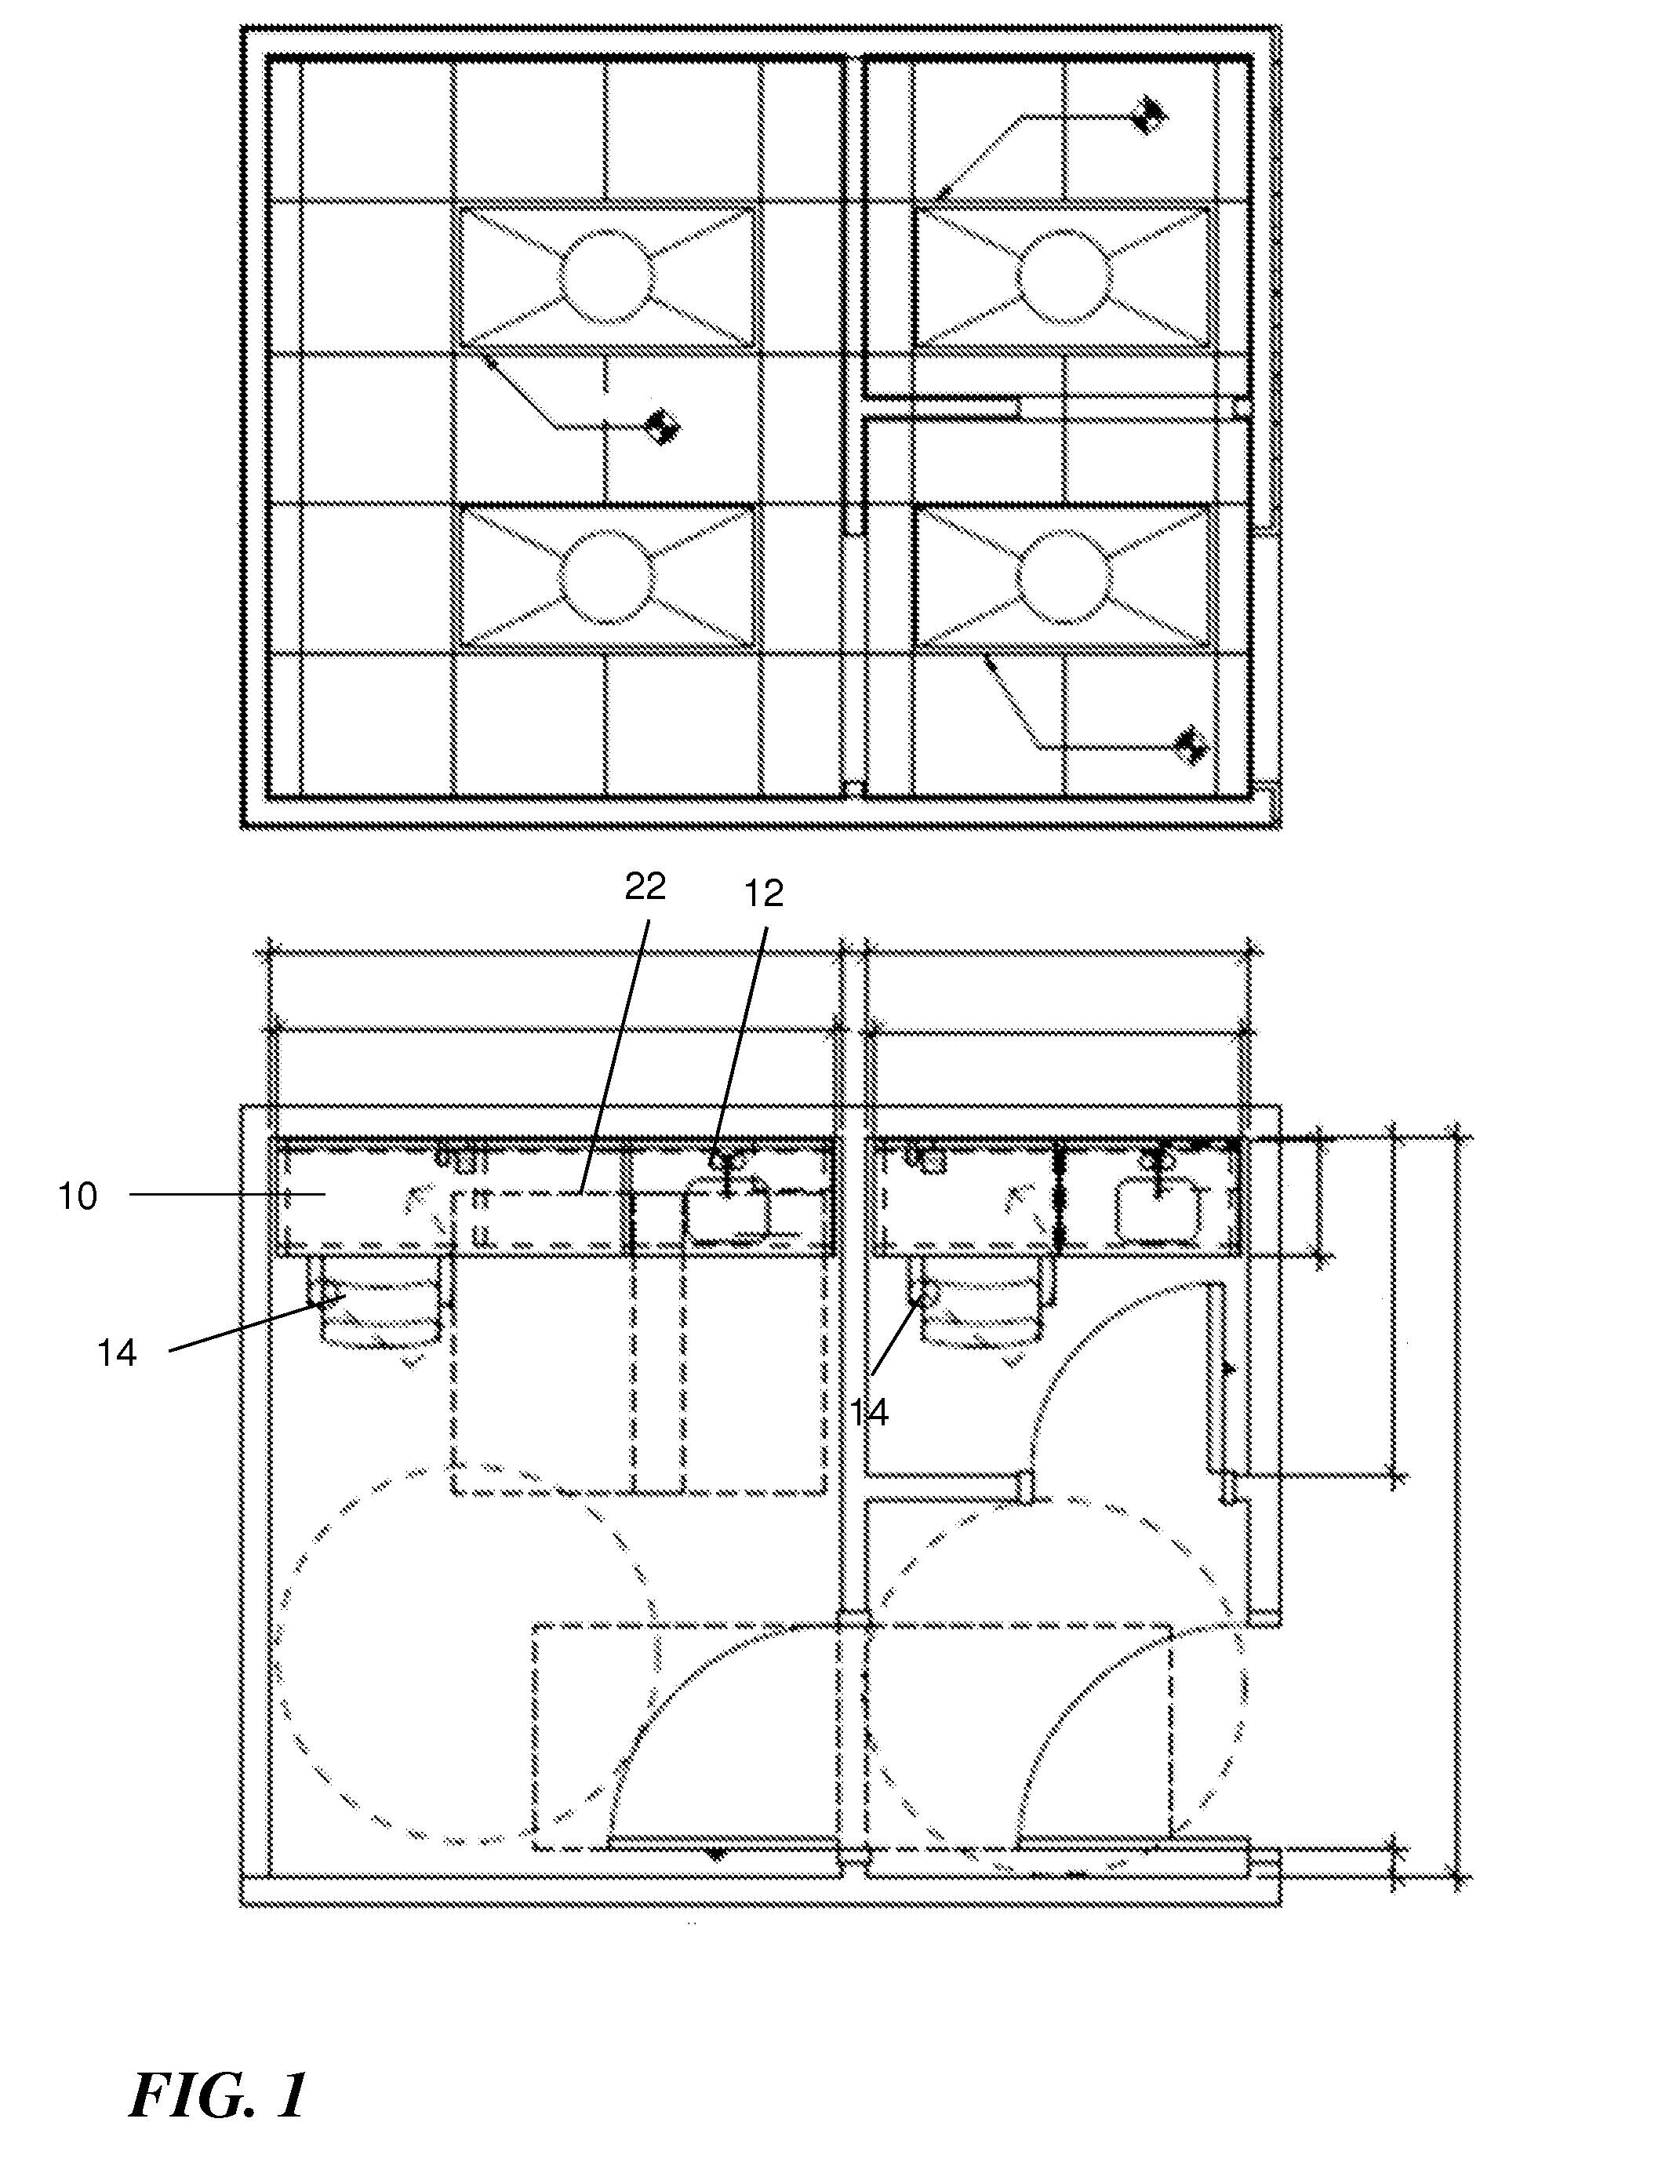 Method, apparatus, and system for lactation accommodation